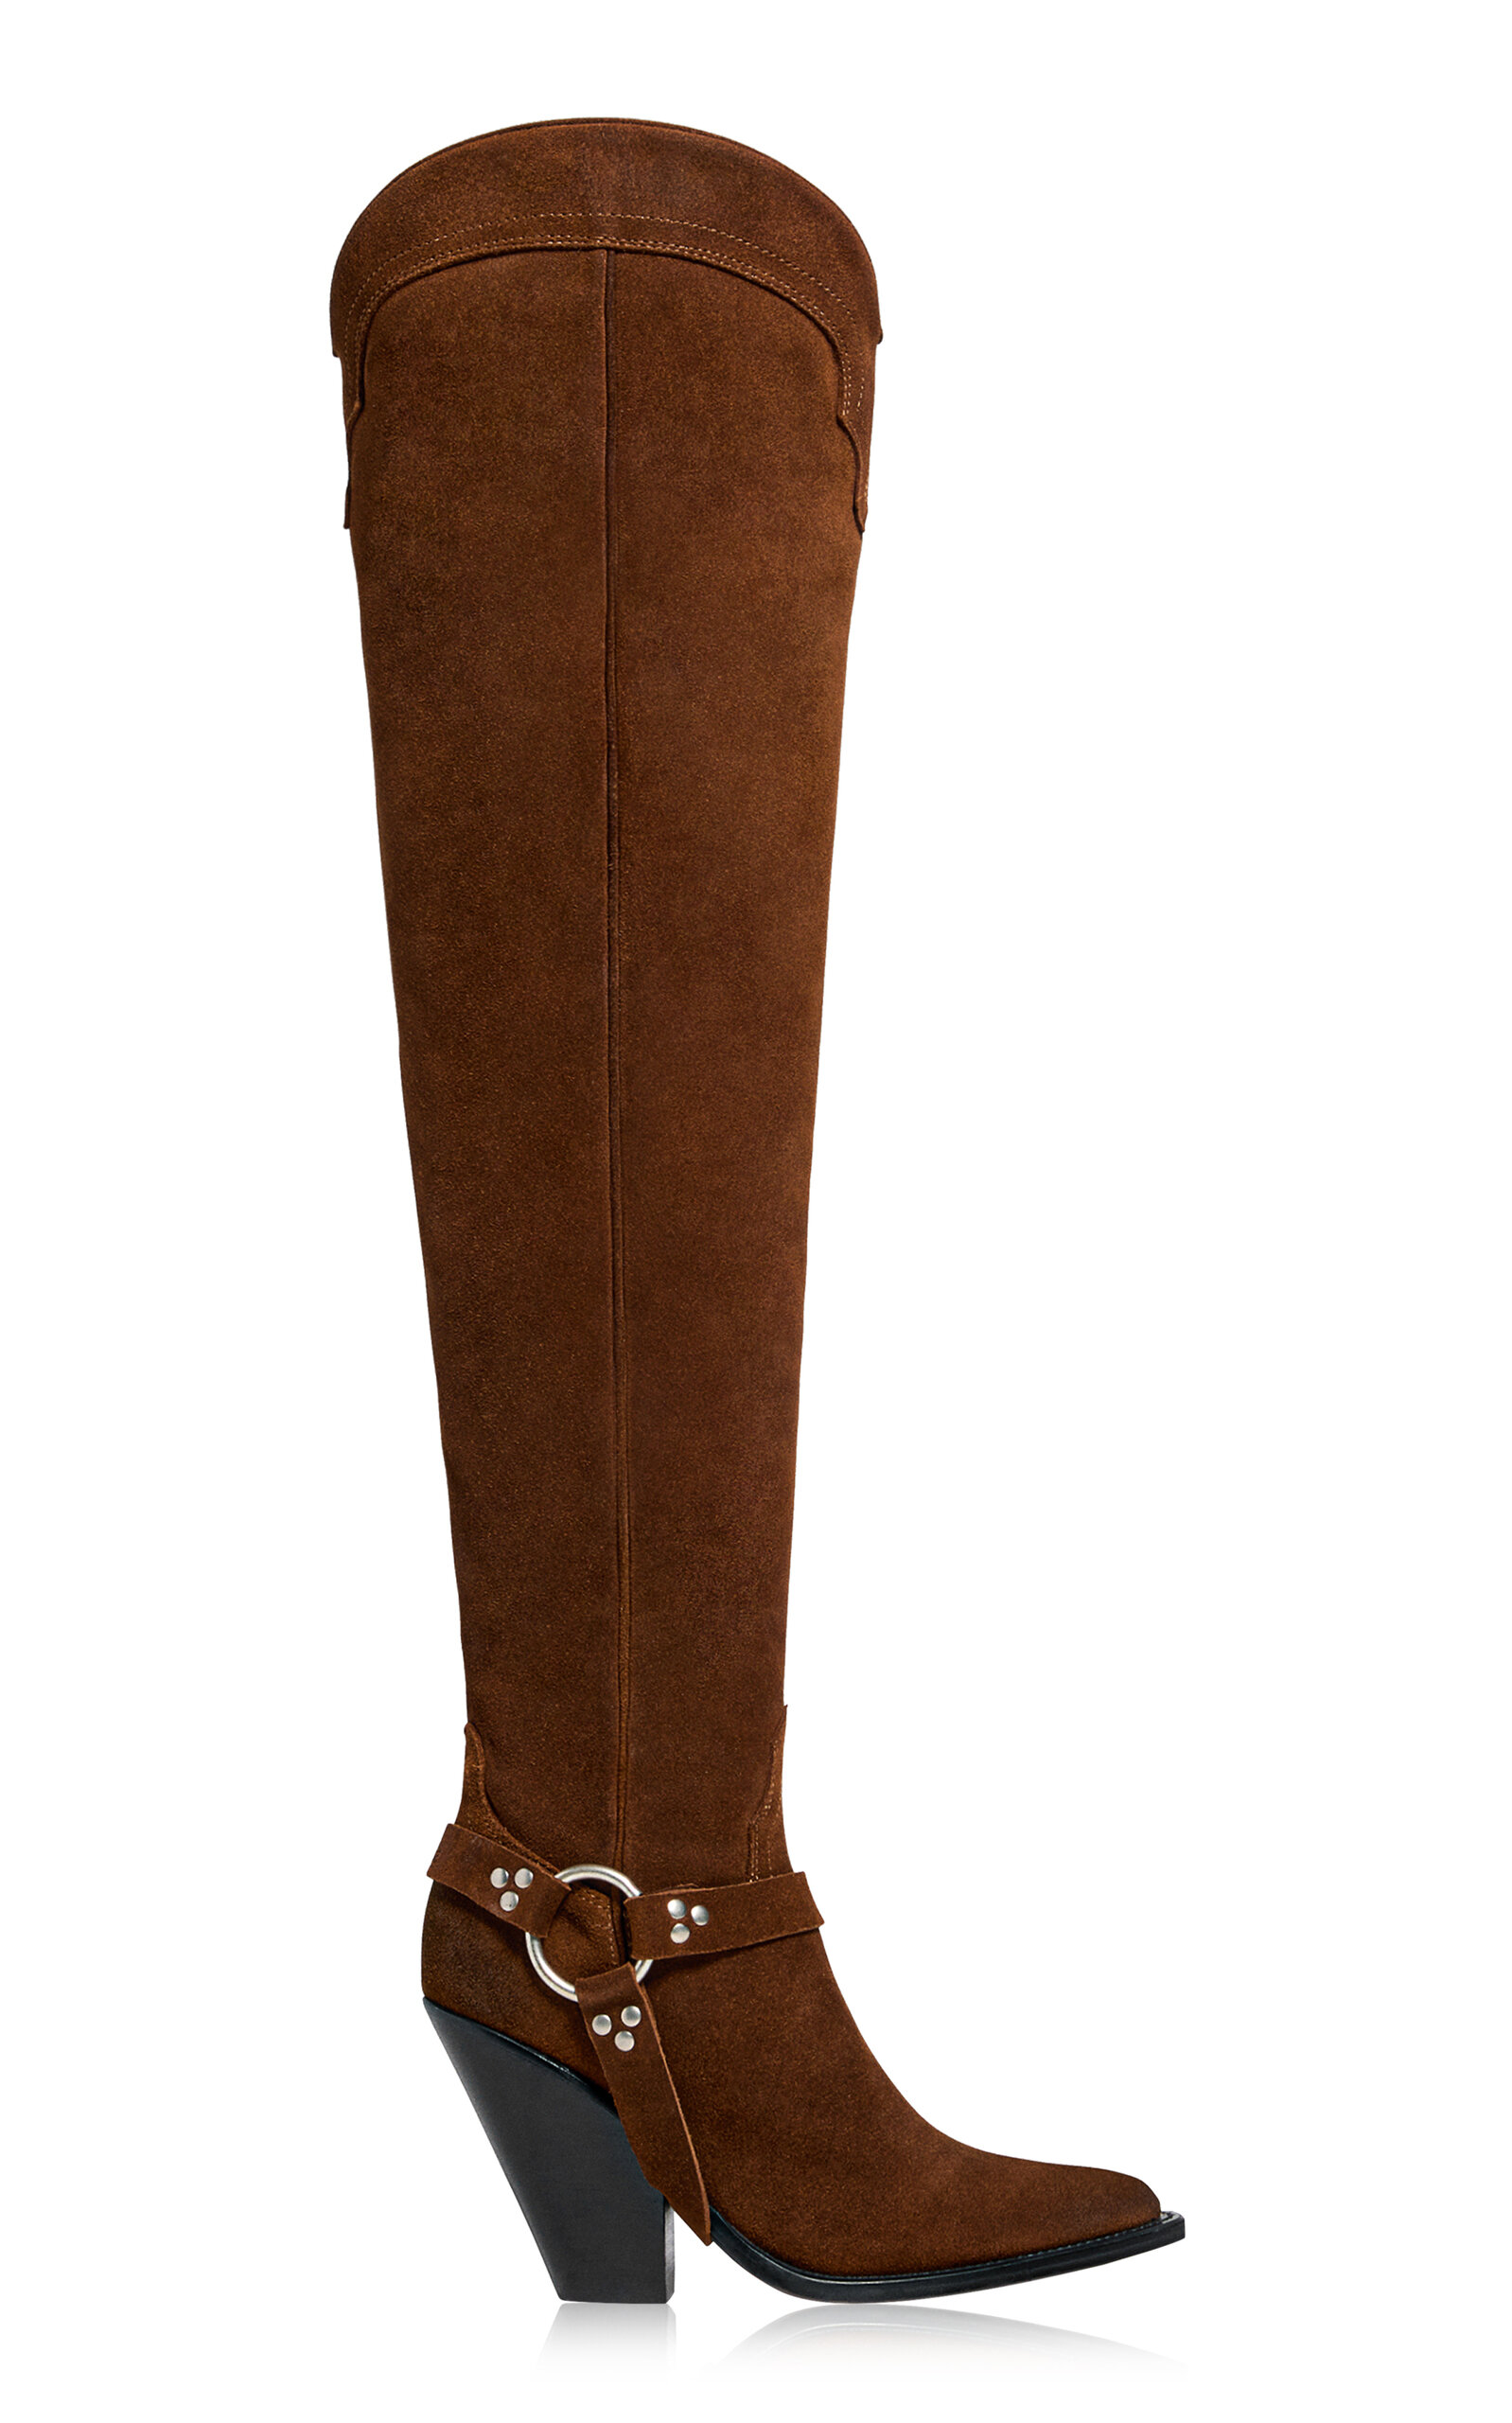 Reynosa Suede Over-The-Knee Western Boots